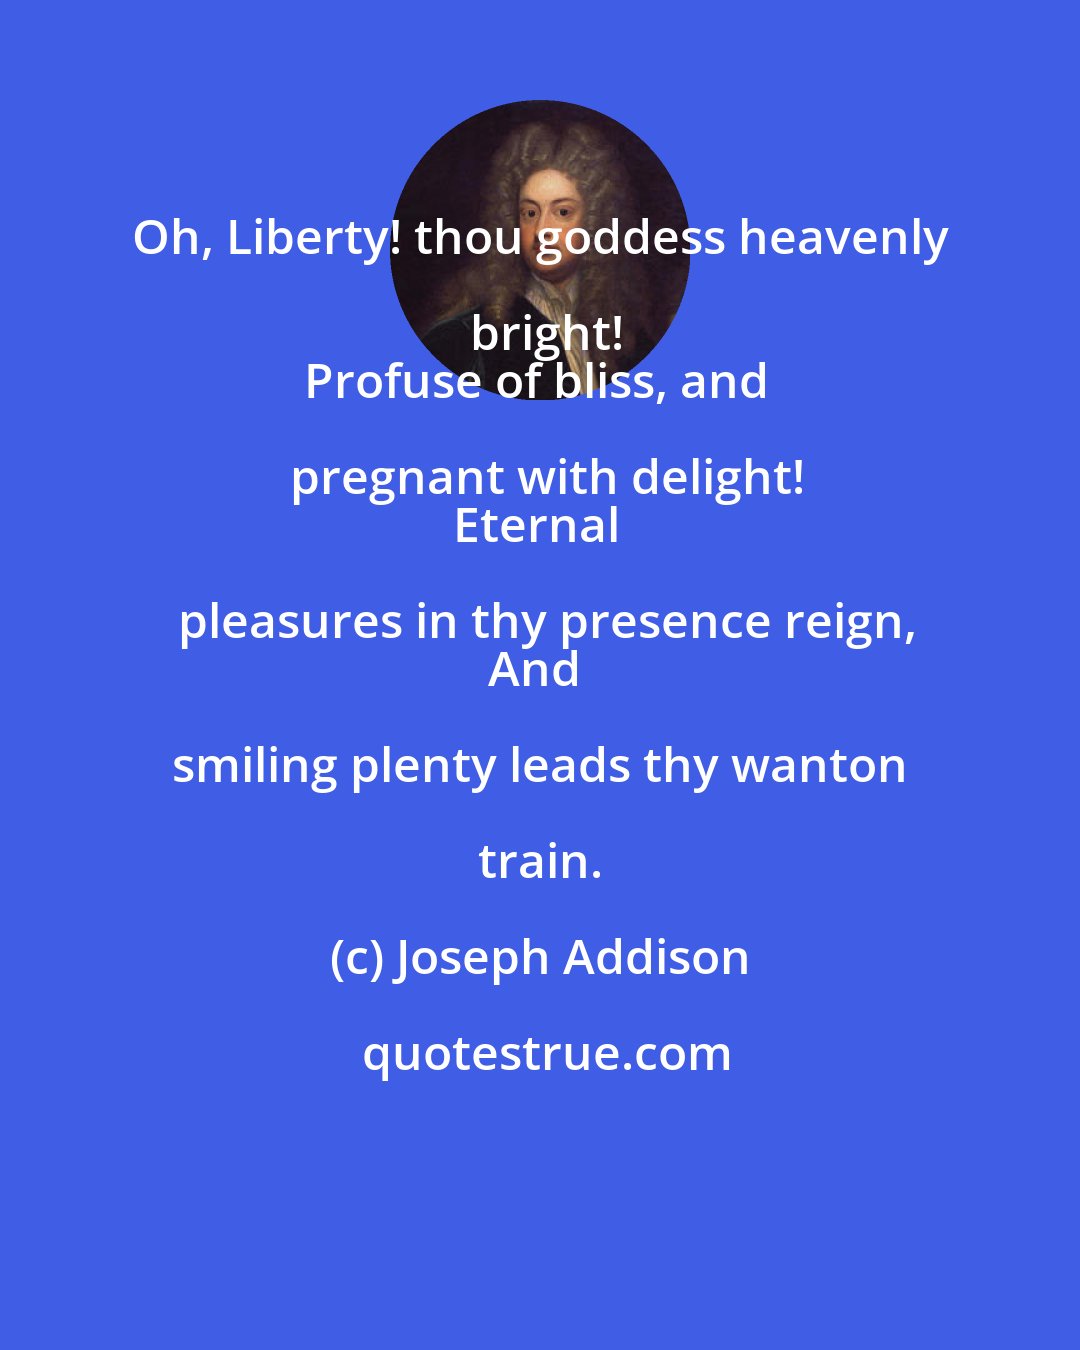 Joseph Addison: Oh, Liberty! thou goddess heavenly bright!
Profuse of bliss, and pregnant with delight!
Eternal pleasures in thy presence reign,
And smiling plenty leads thy wanton train.